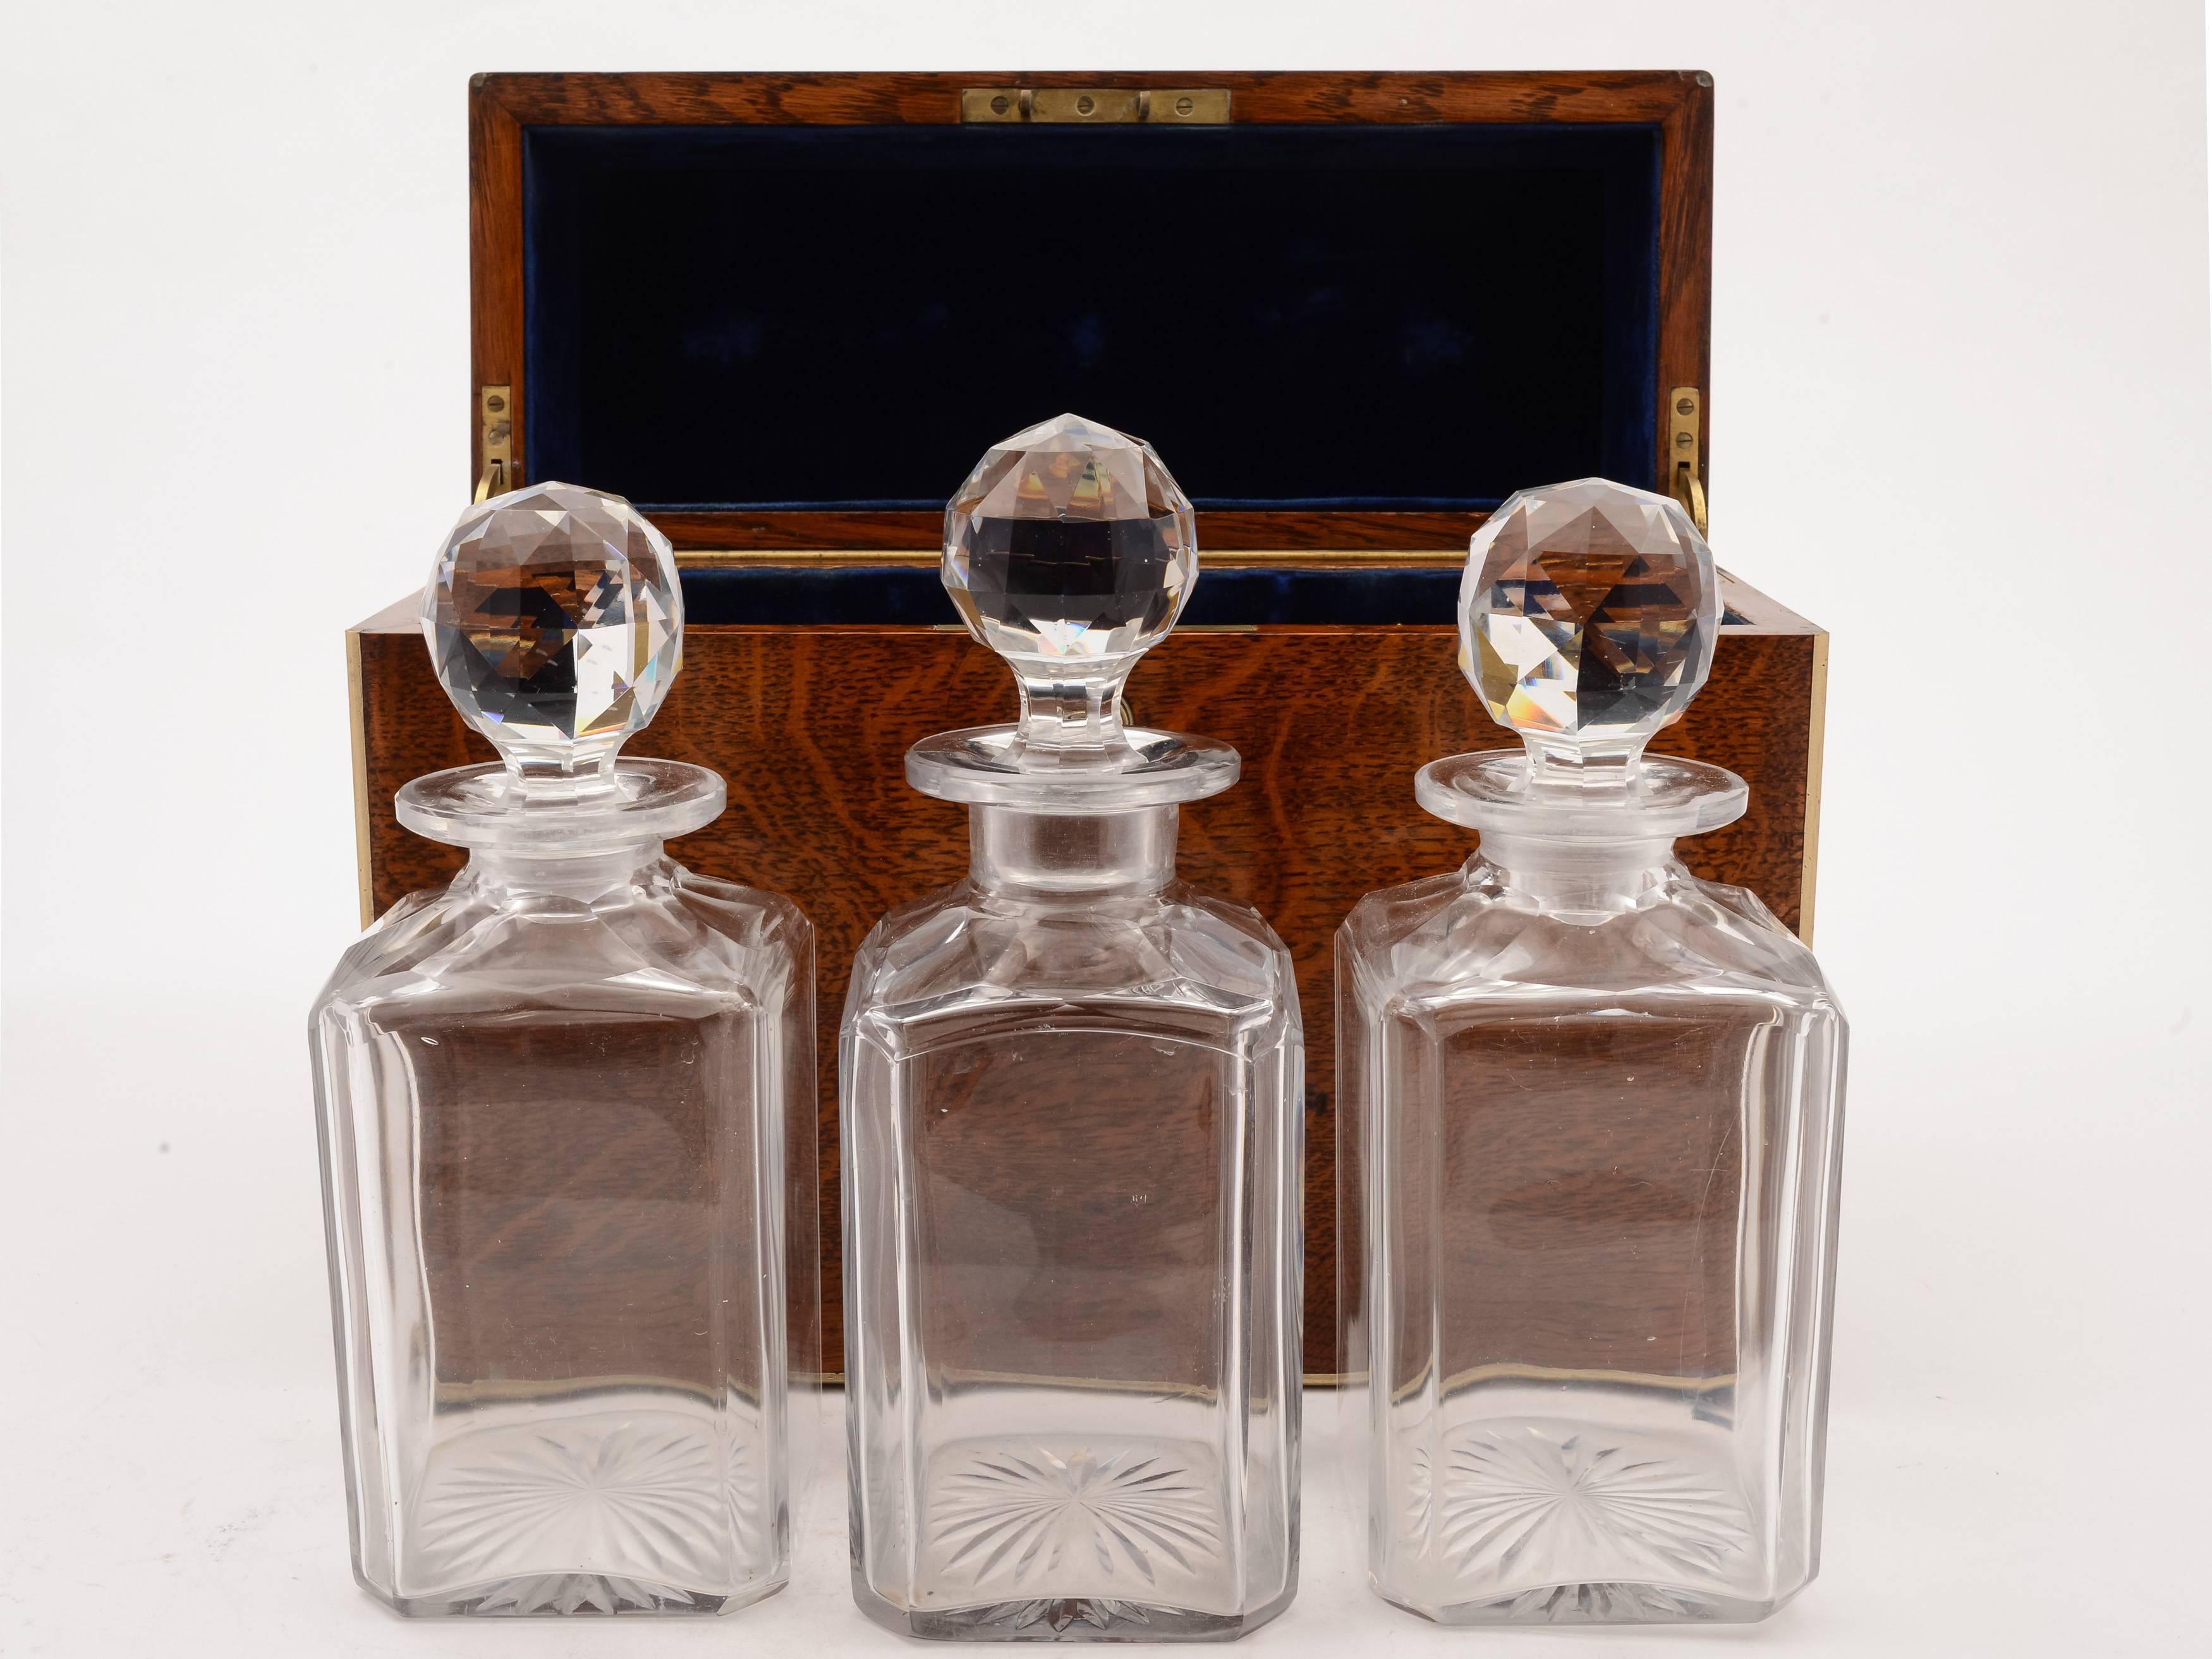 A beautiful Victorian three bottle tantalus in oak case which is edged with brass and has three blue velvet-lined compartments. The lid is blue velvet lined and has a brass lock with original key. Inside the box are three matched square cut glass